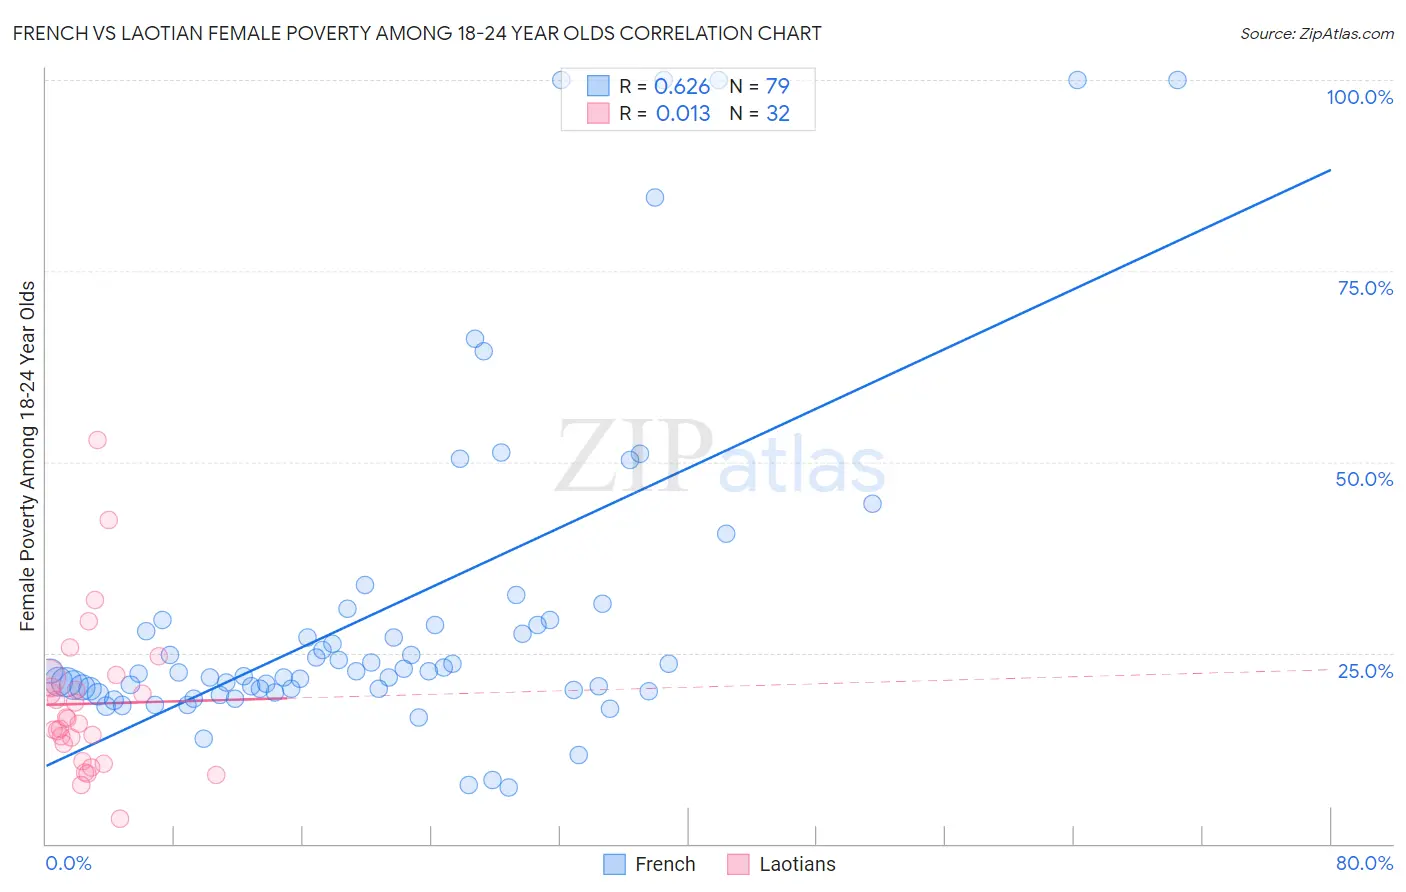 French vs Laotian Female Poverty Among 18-24 Year Olds